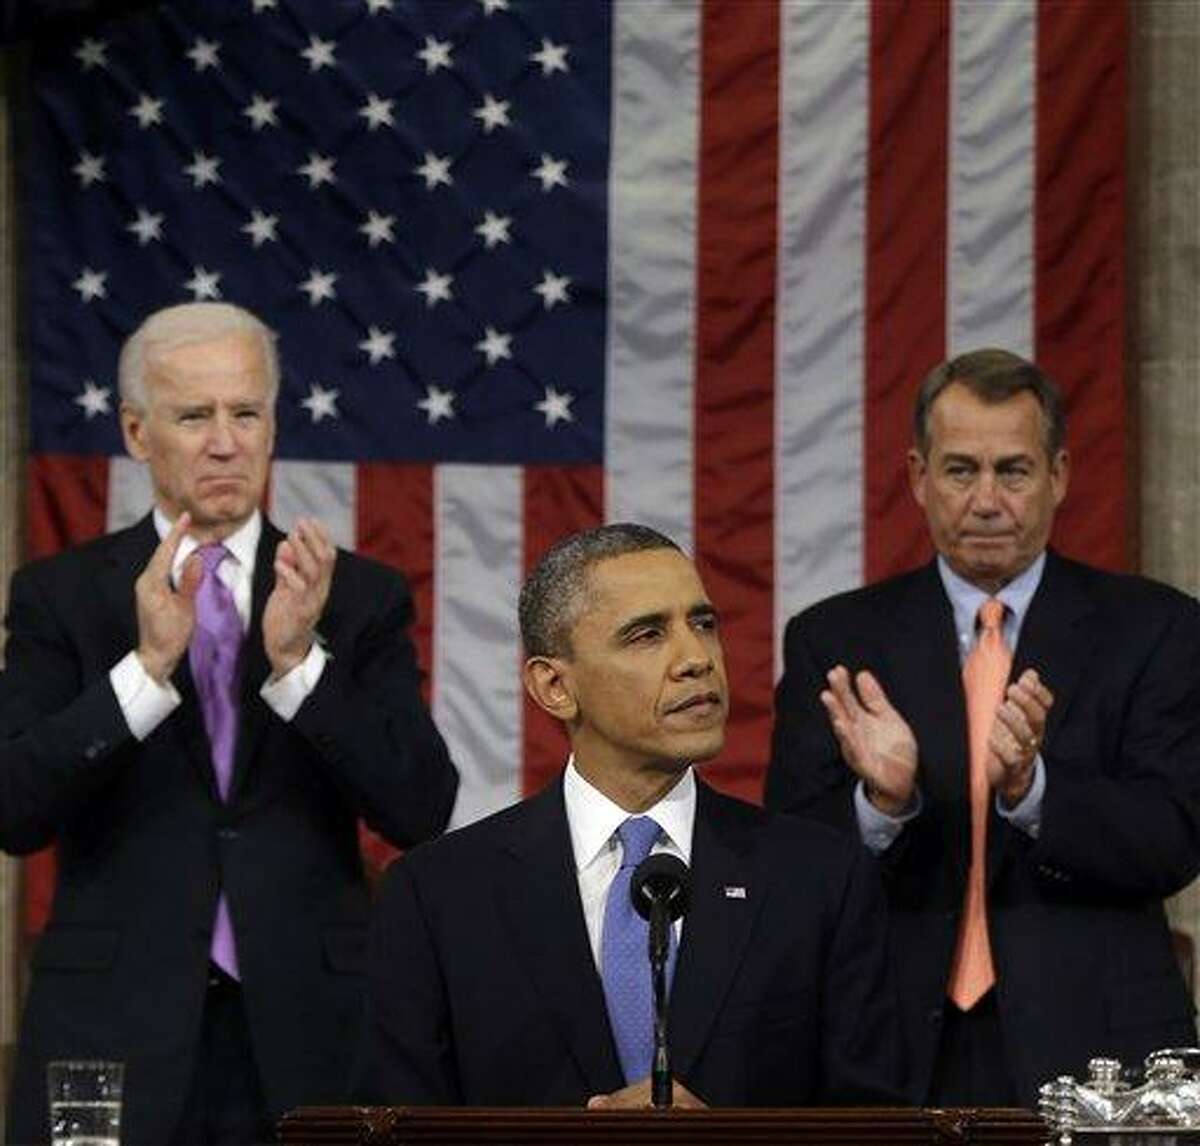 Vice President Joe Biden and House Speaker John Boehner of Ohio applaud President Barack Obama as he gives his State of the Union address during a joint session of Congress on Capitol Hill in Washington, Tuesday Feb. 12, 2013. (AP Photo/Charles Dharapak, Pool)